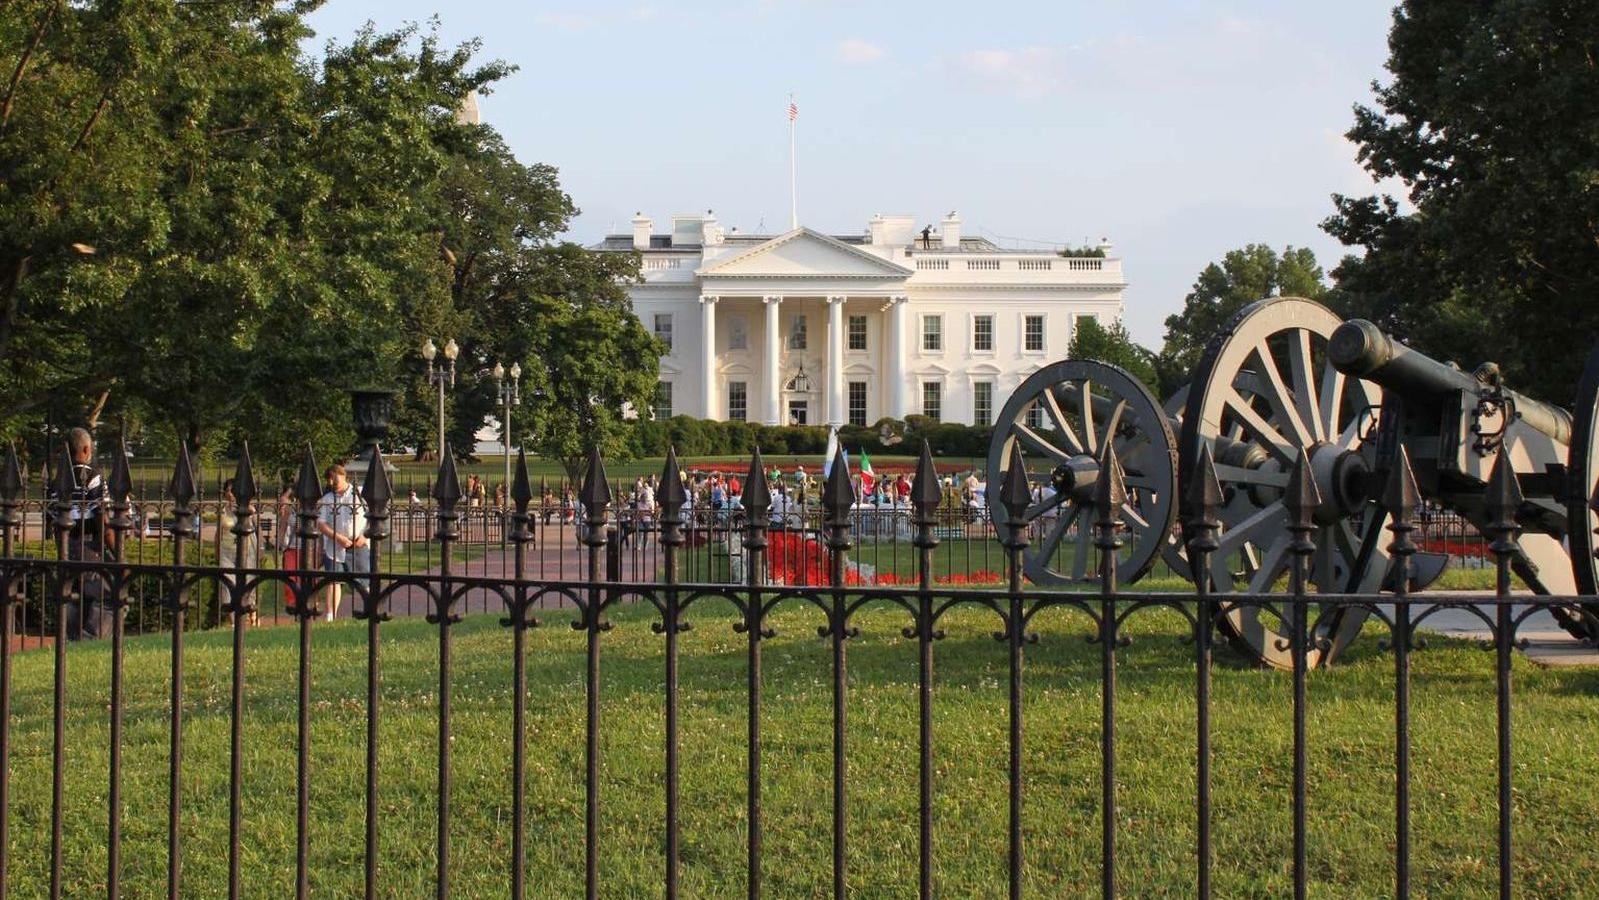 A cannon sits in a circular spot of grass surrounded by a fence. The White House is behind it.